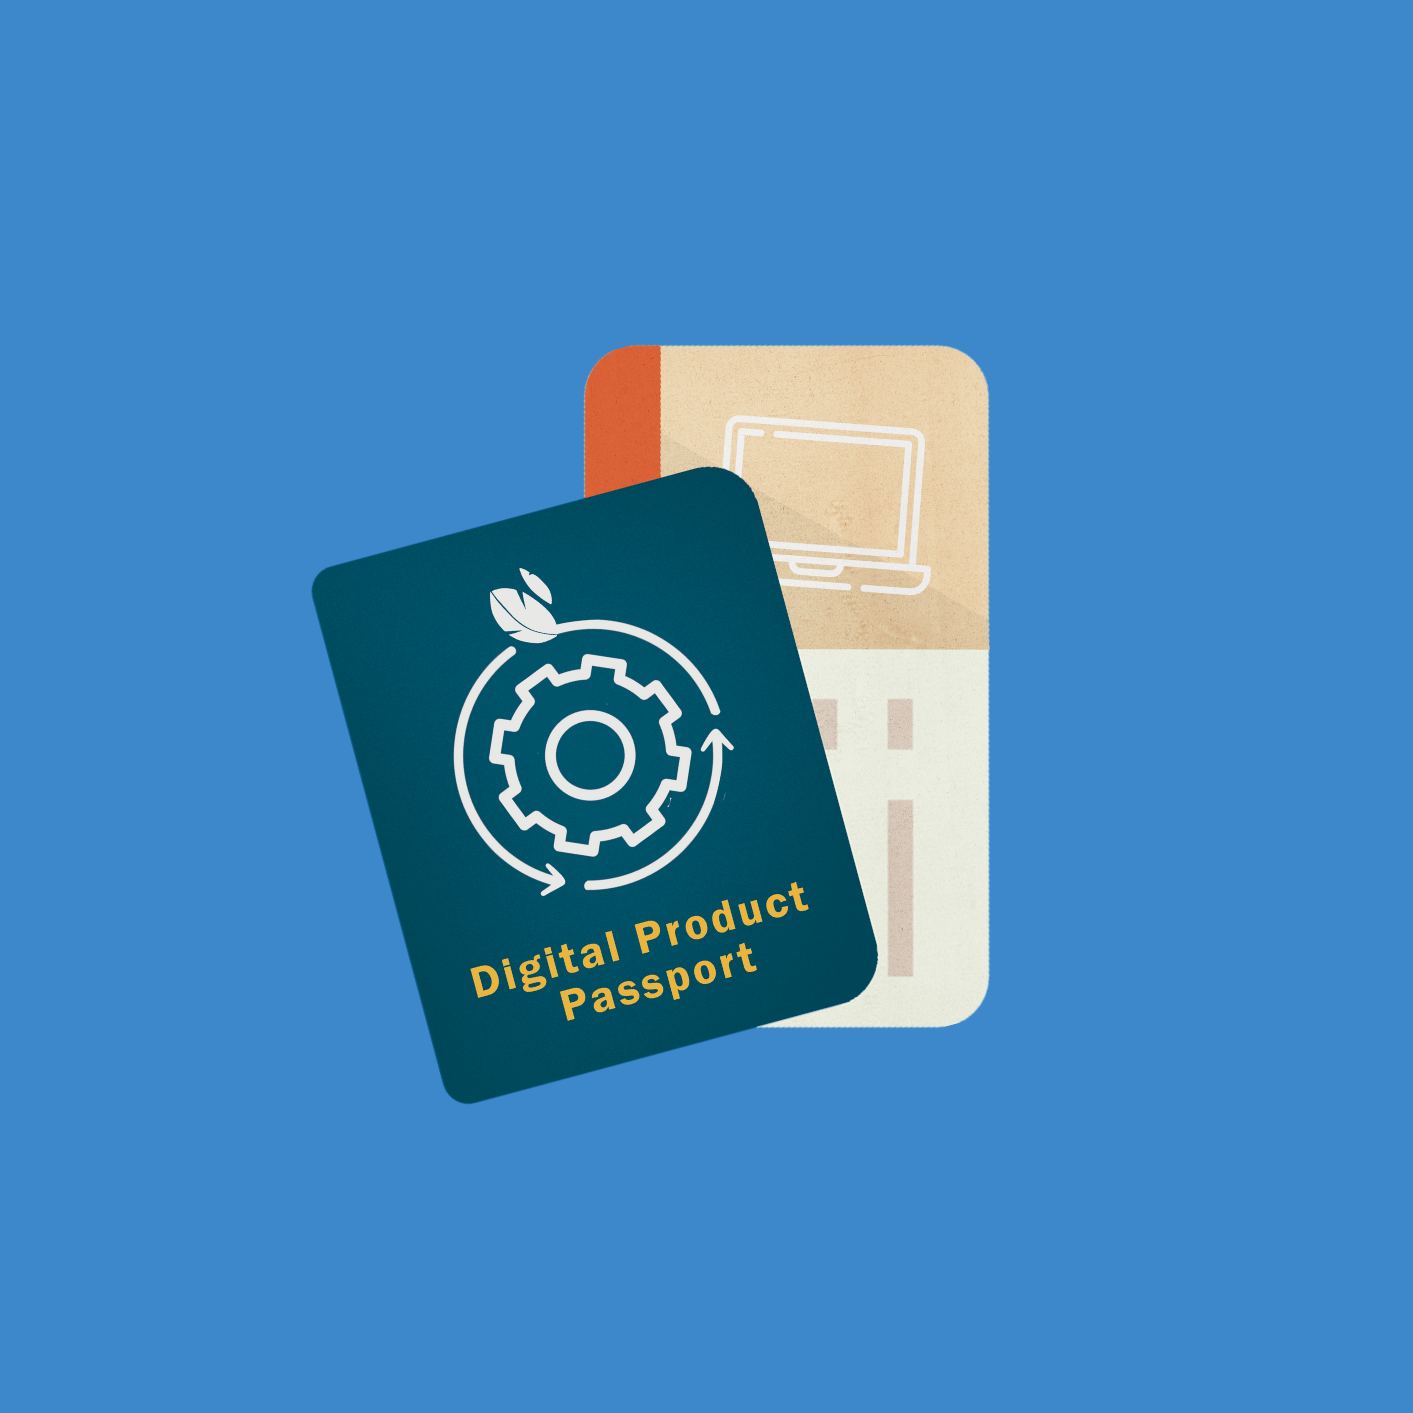 Digital Product Passport: what is it and what does it imply for the textile industry?